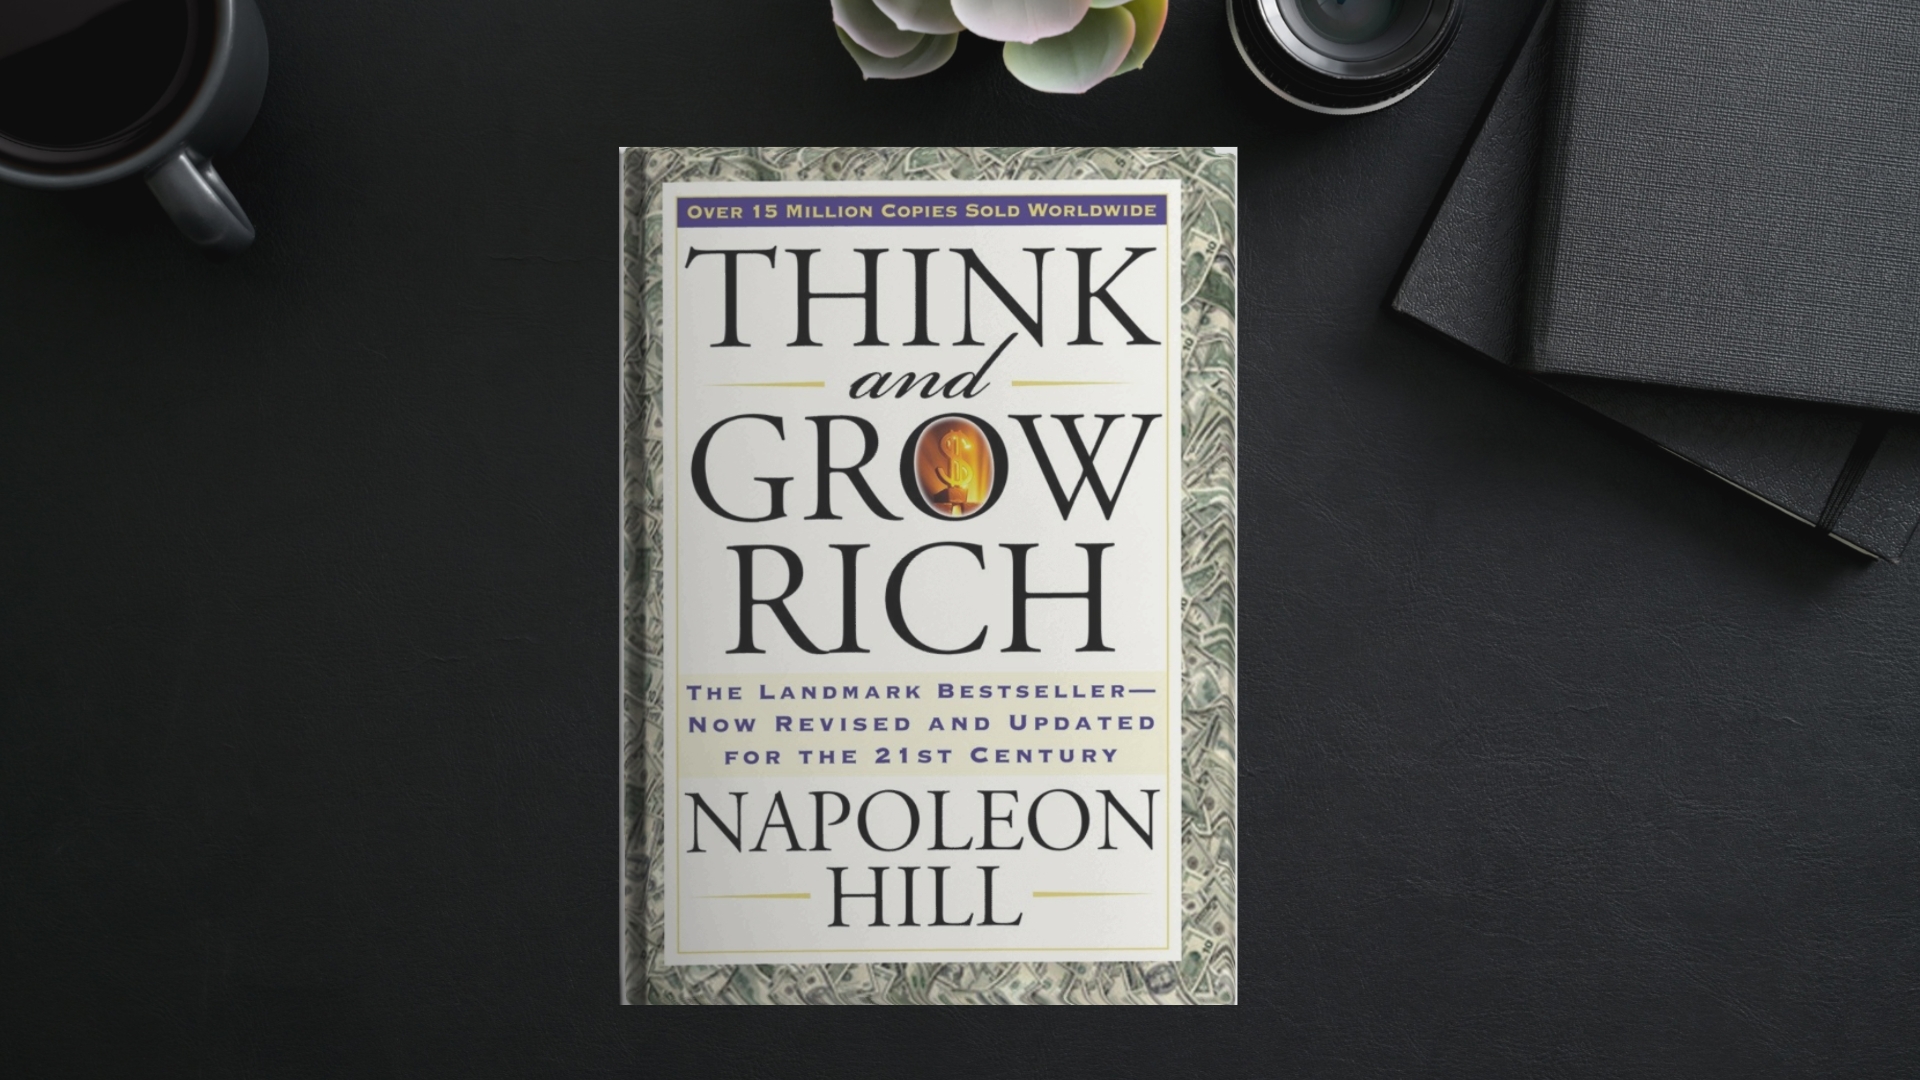 Think and grow rich book